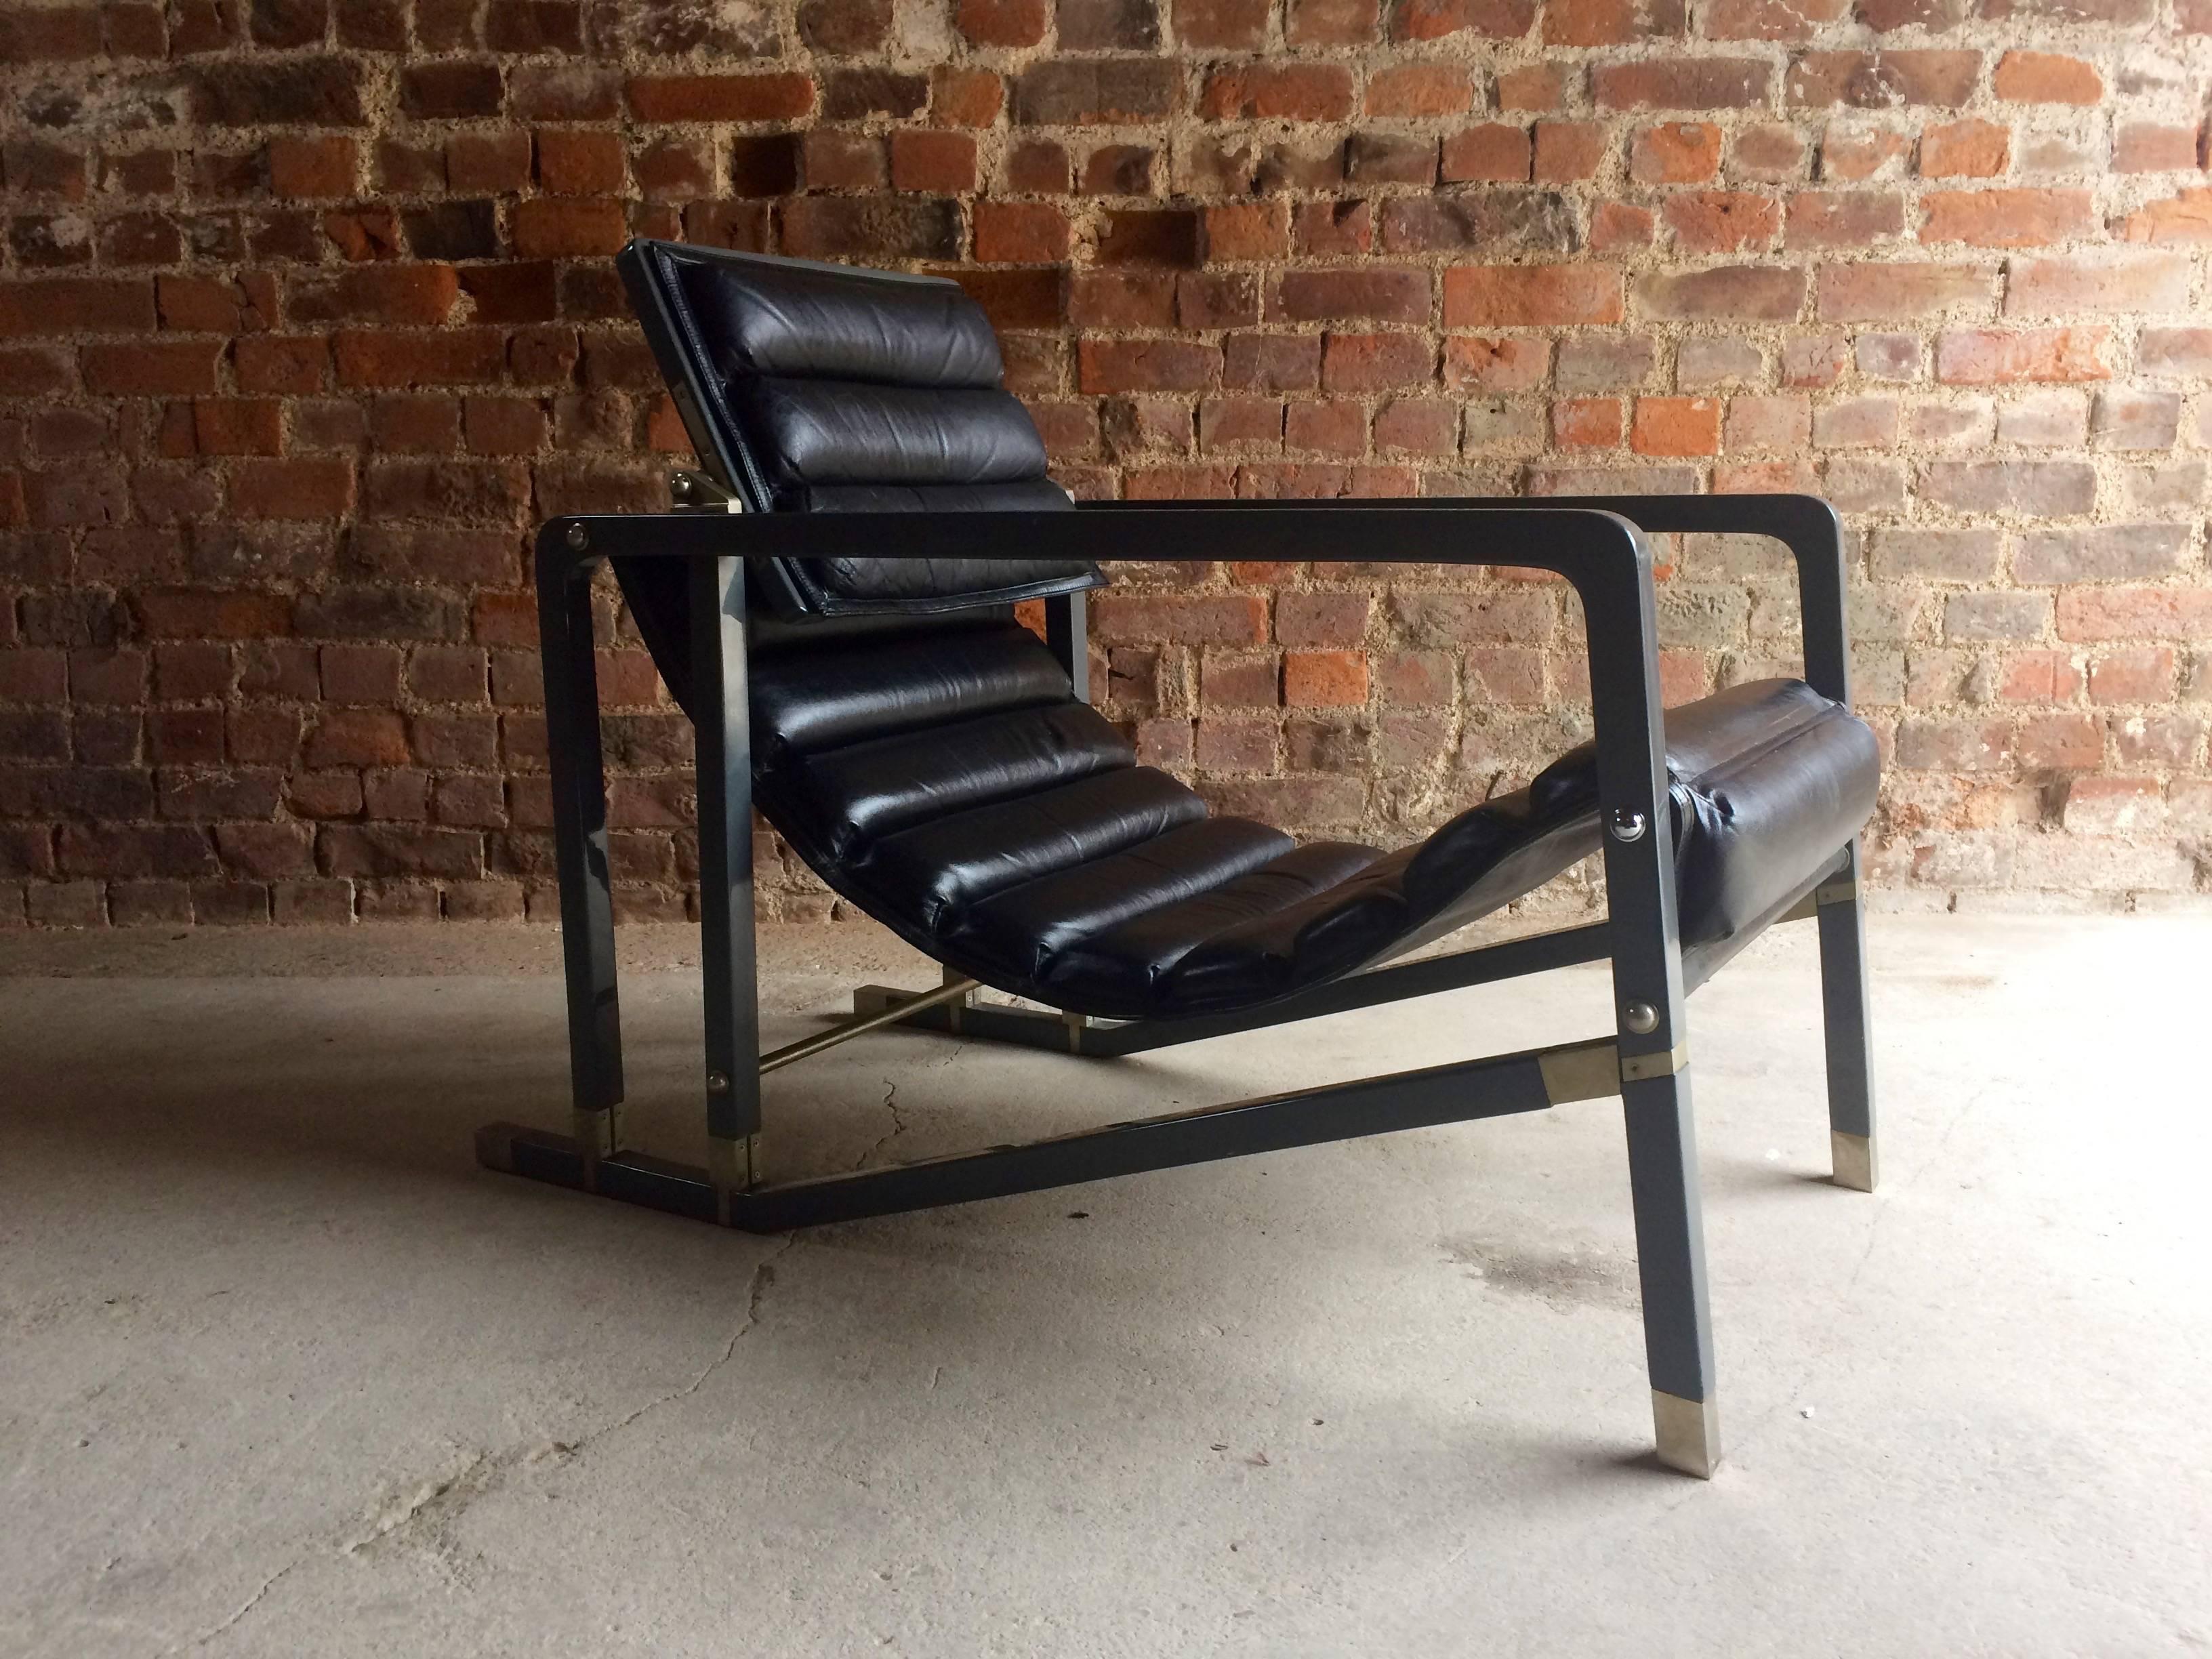 Stunning Eileen Gray black leather Transat chair by Aram

A stunning iconic designed Transat chair by Eileen Gray, manufactured by Aram, late 20th century, in black leather, with grey lacquered frame, extremely comfortable and too beautiful for